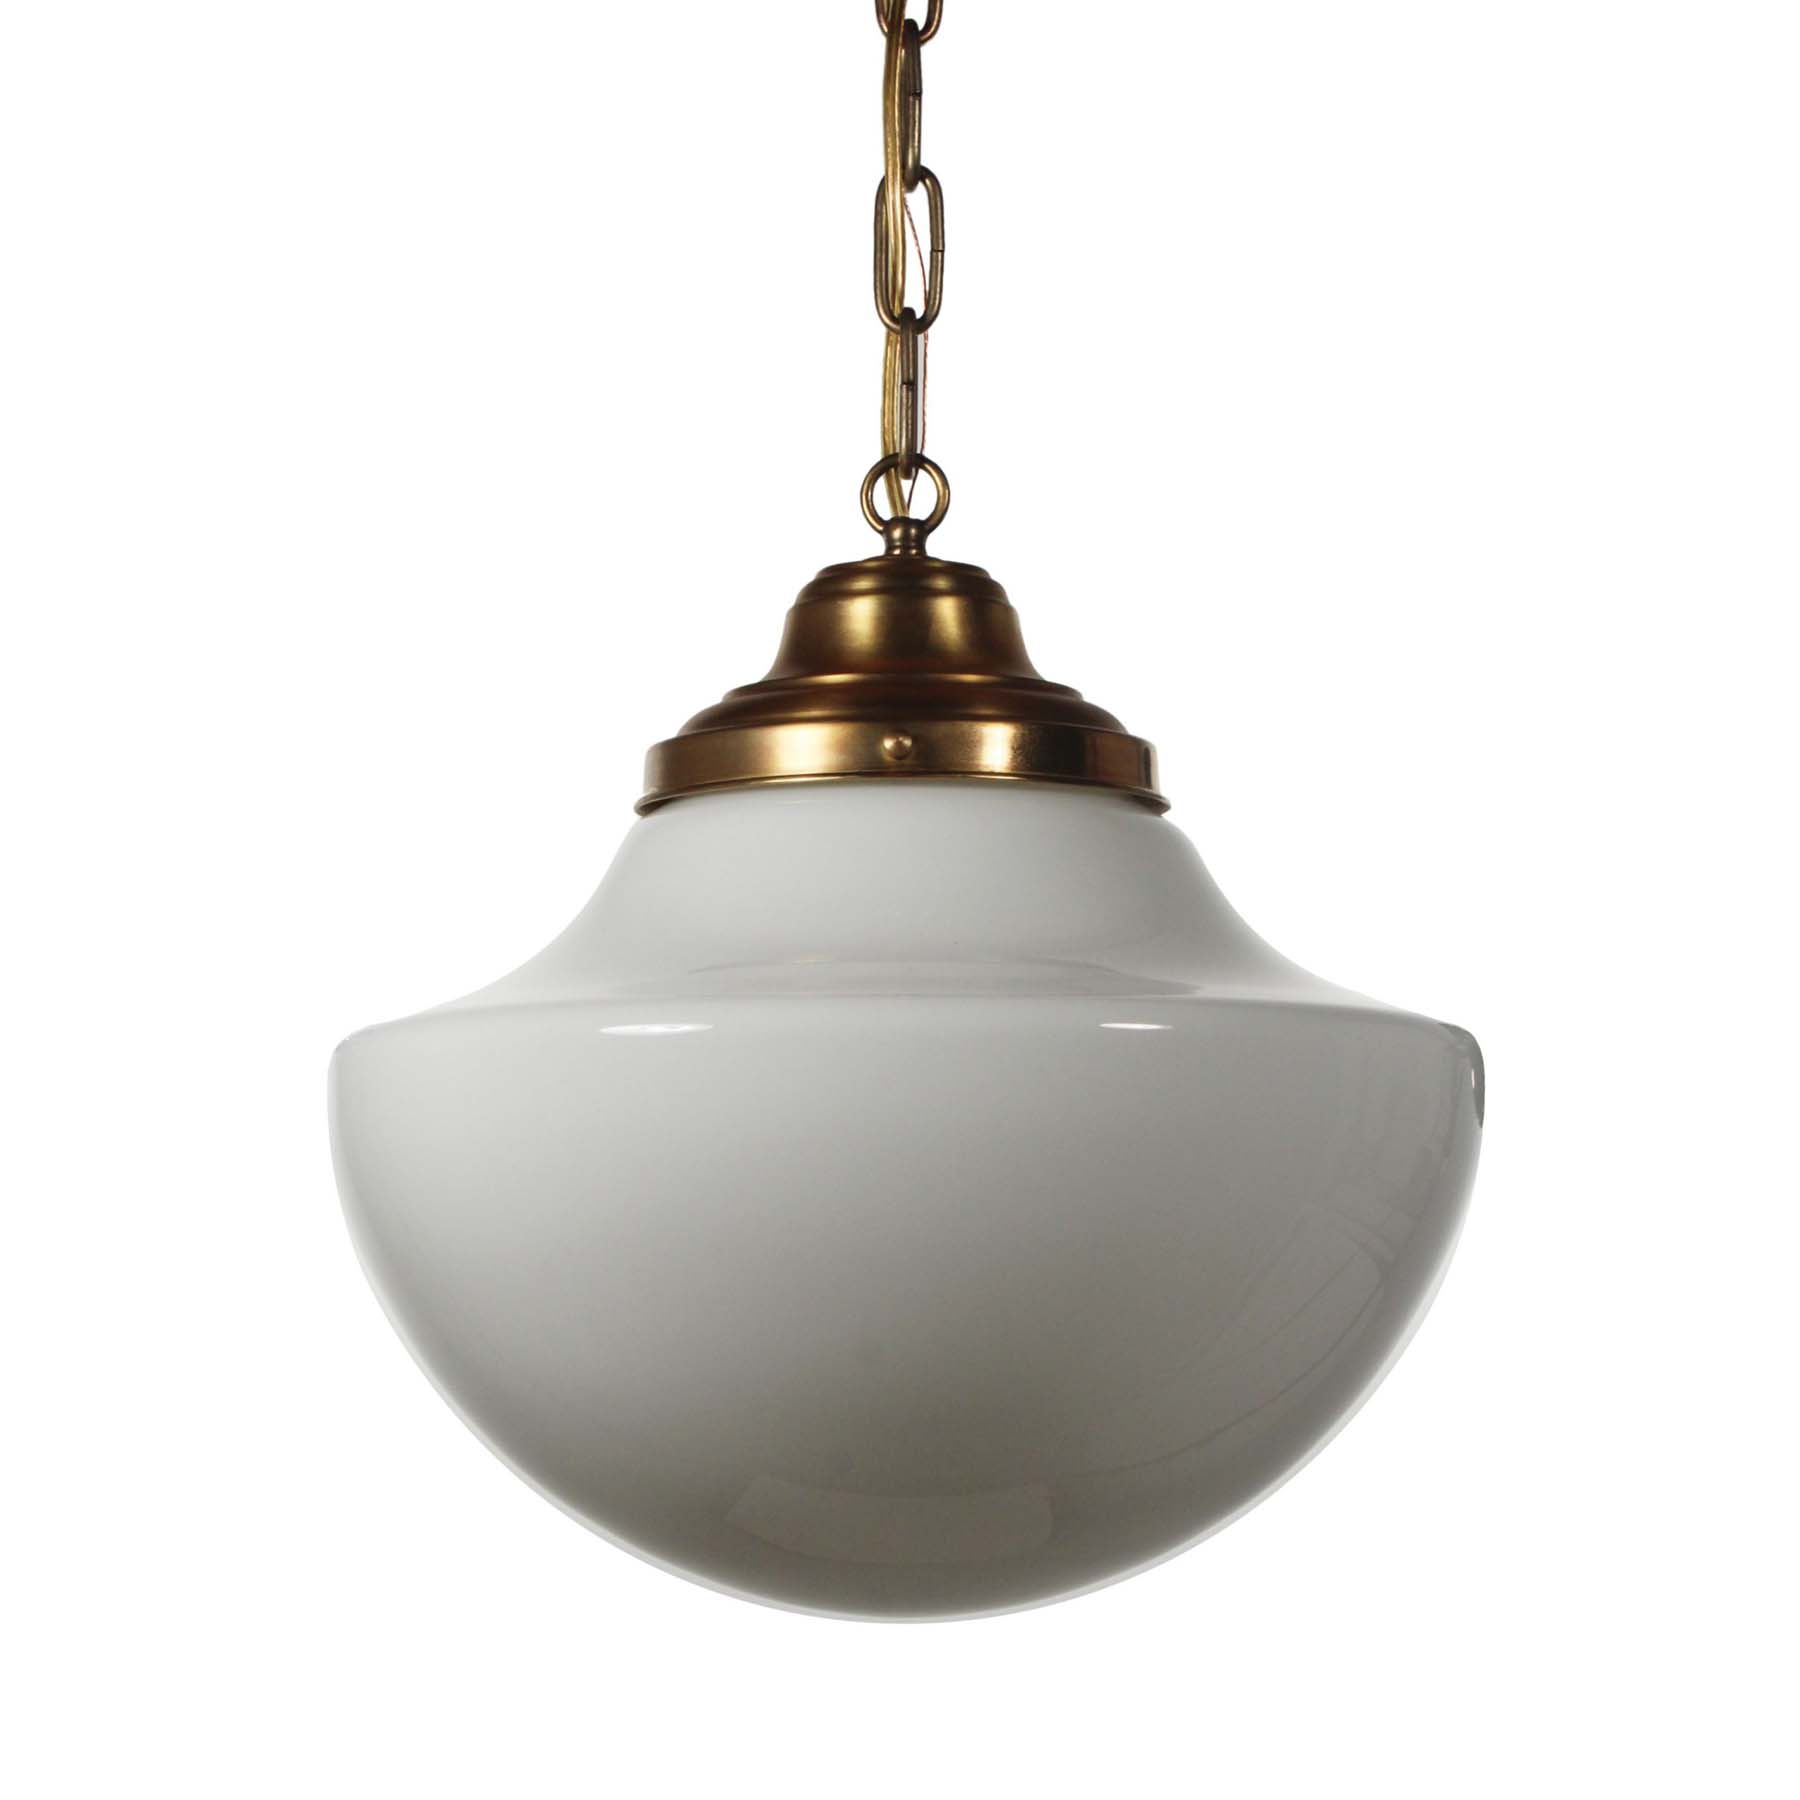 SOLD Antique Schoolhouse Light Pendant with Glass Globe-67583